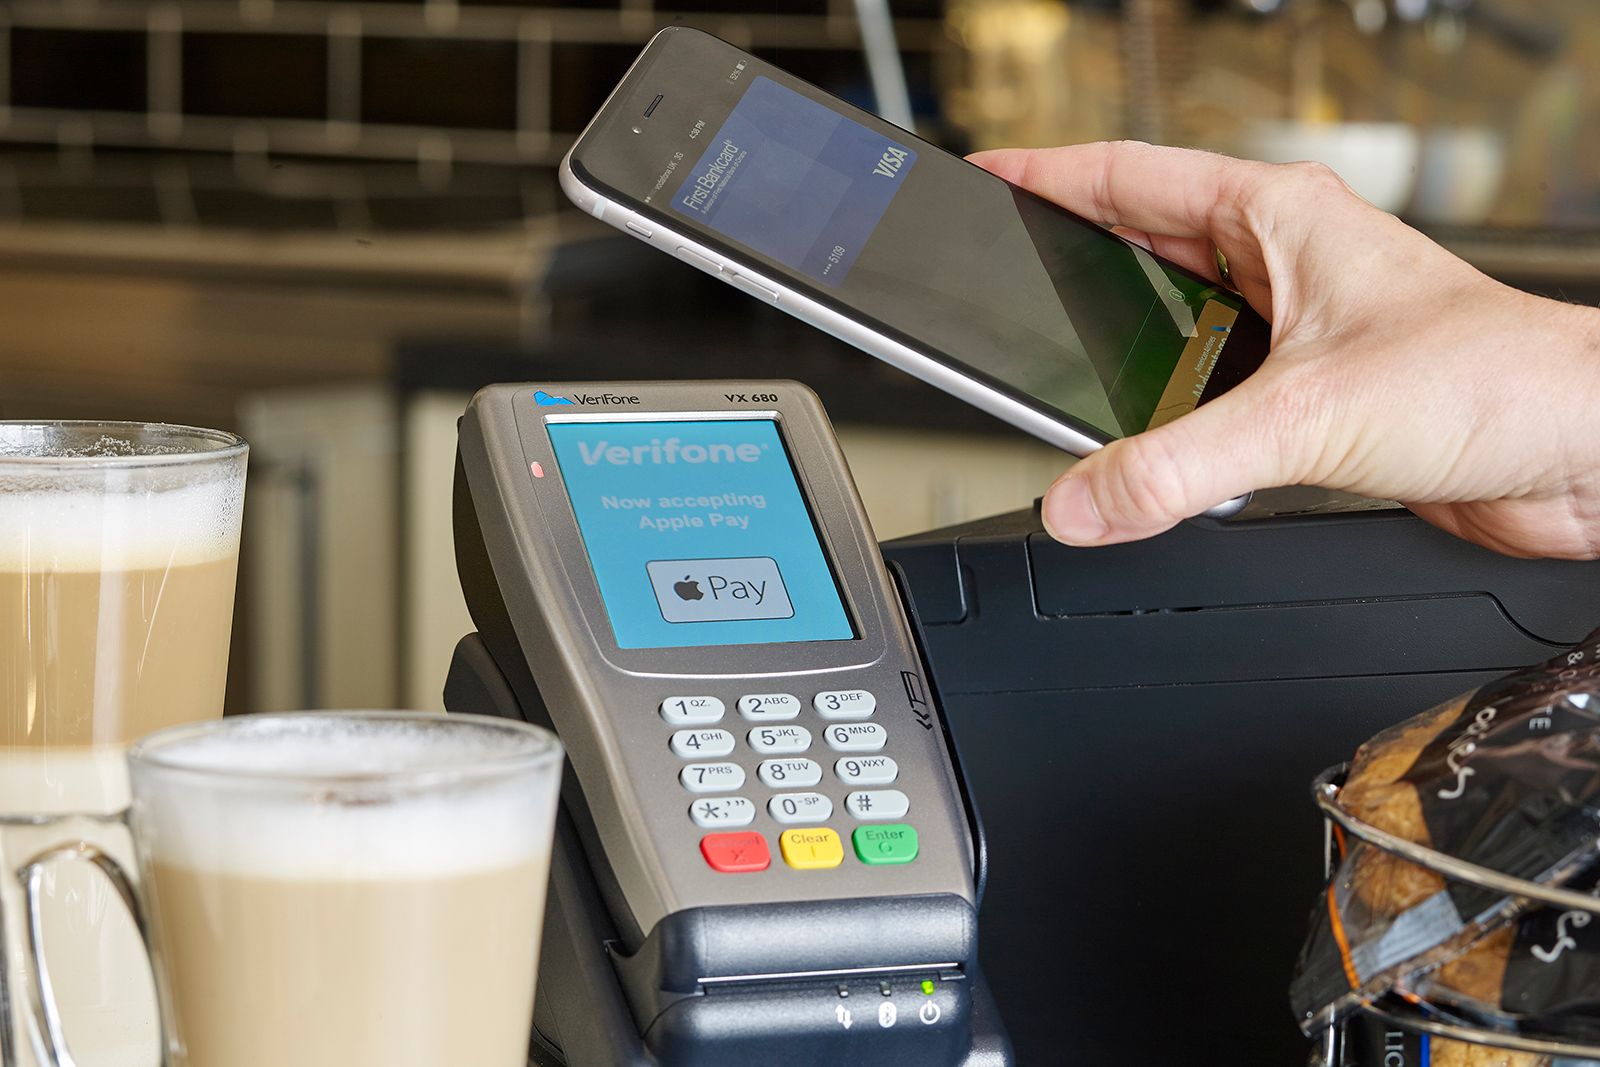 barclays finally supports apple pay in the uk image 1